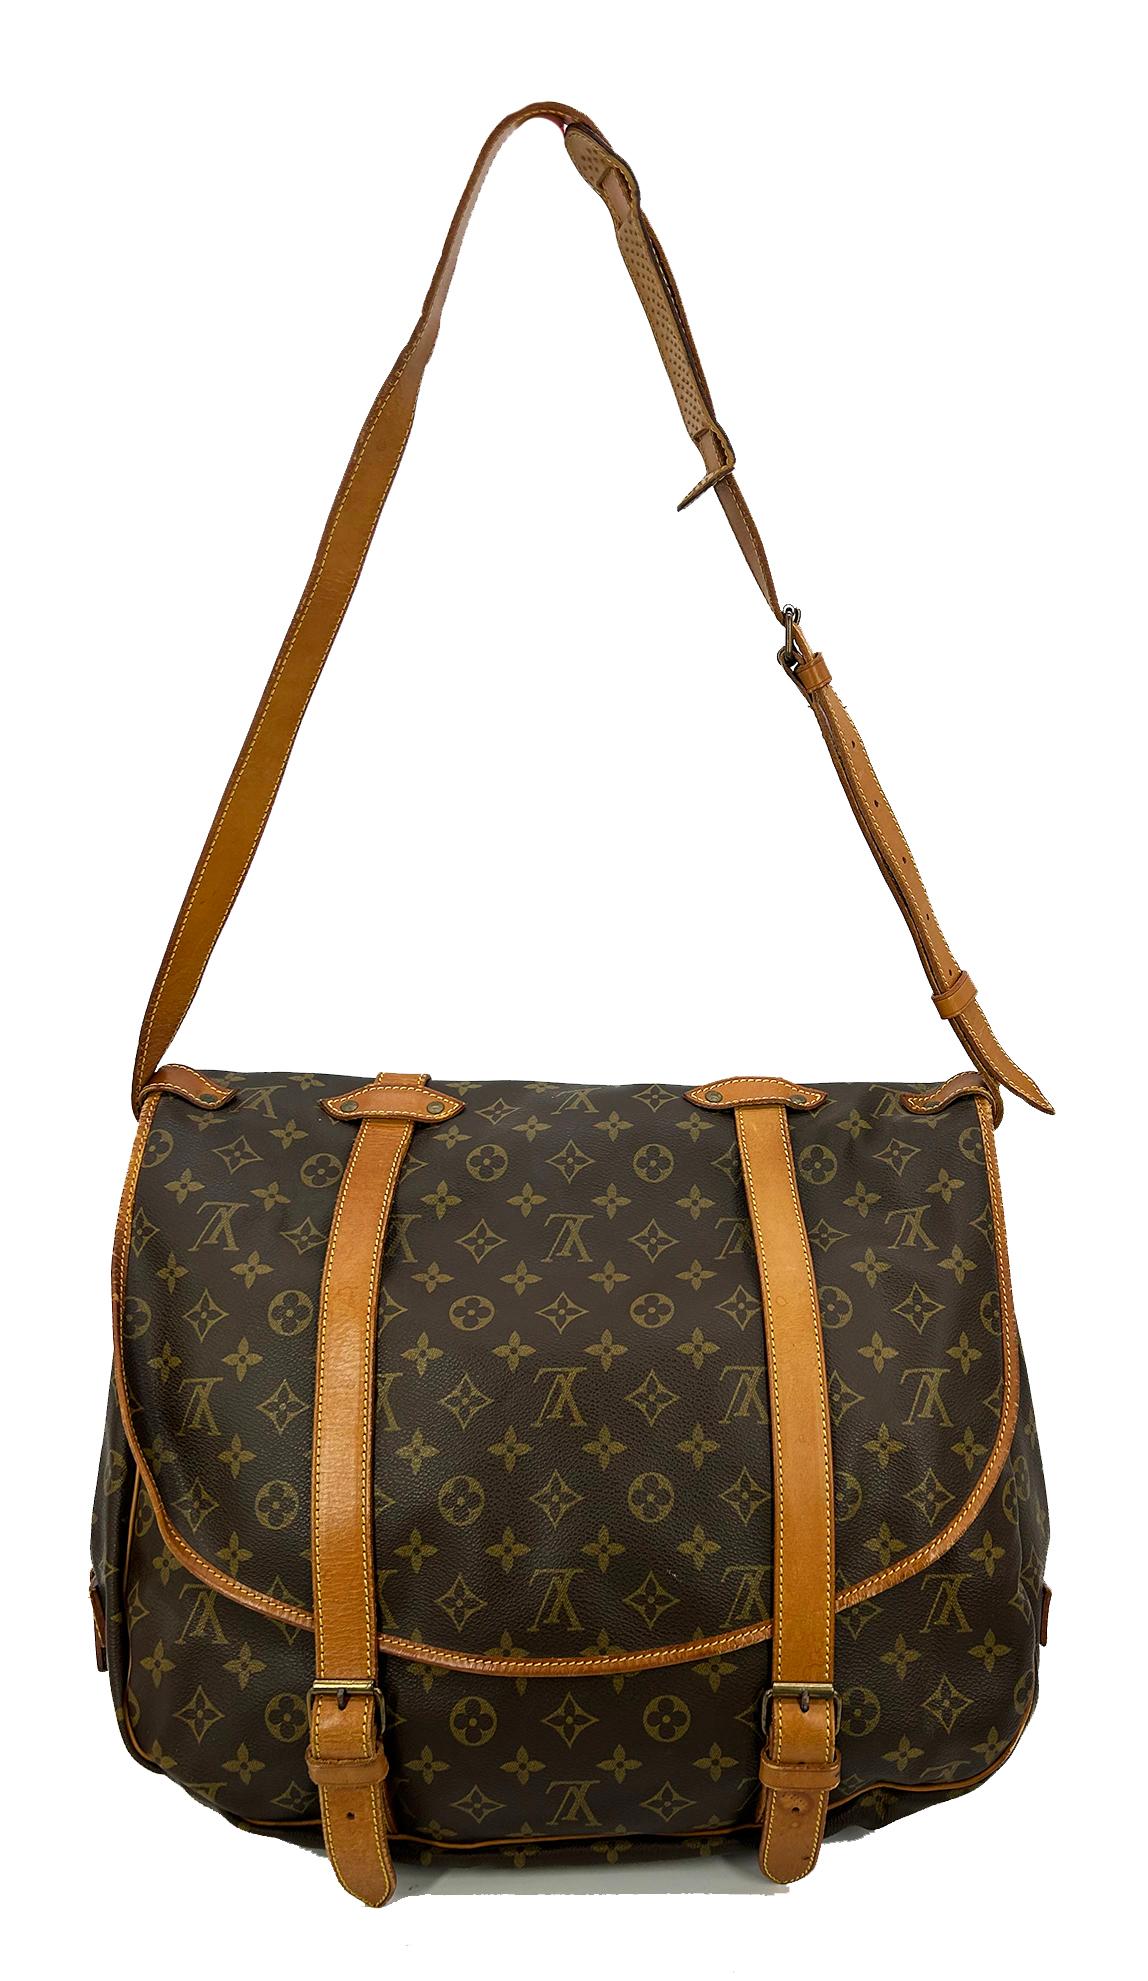 Vintage Louis Vuitton Monogram Samur 43 Messenger Shoulder Bag in good condition. Signature monogram canvas in brown and tan print trimmed with tan leather and brass hardware. Wear throughout consistent with age and use. Double sided messenger flap